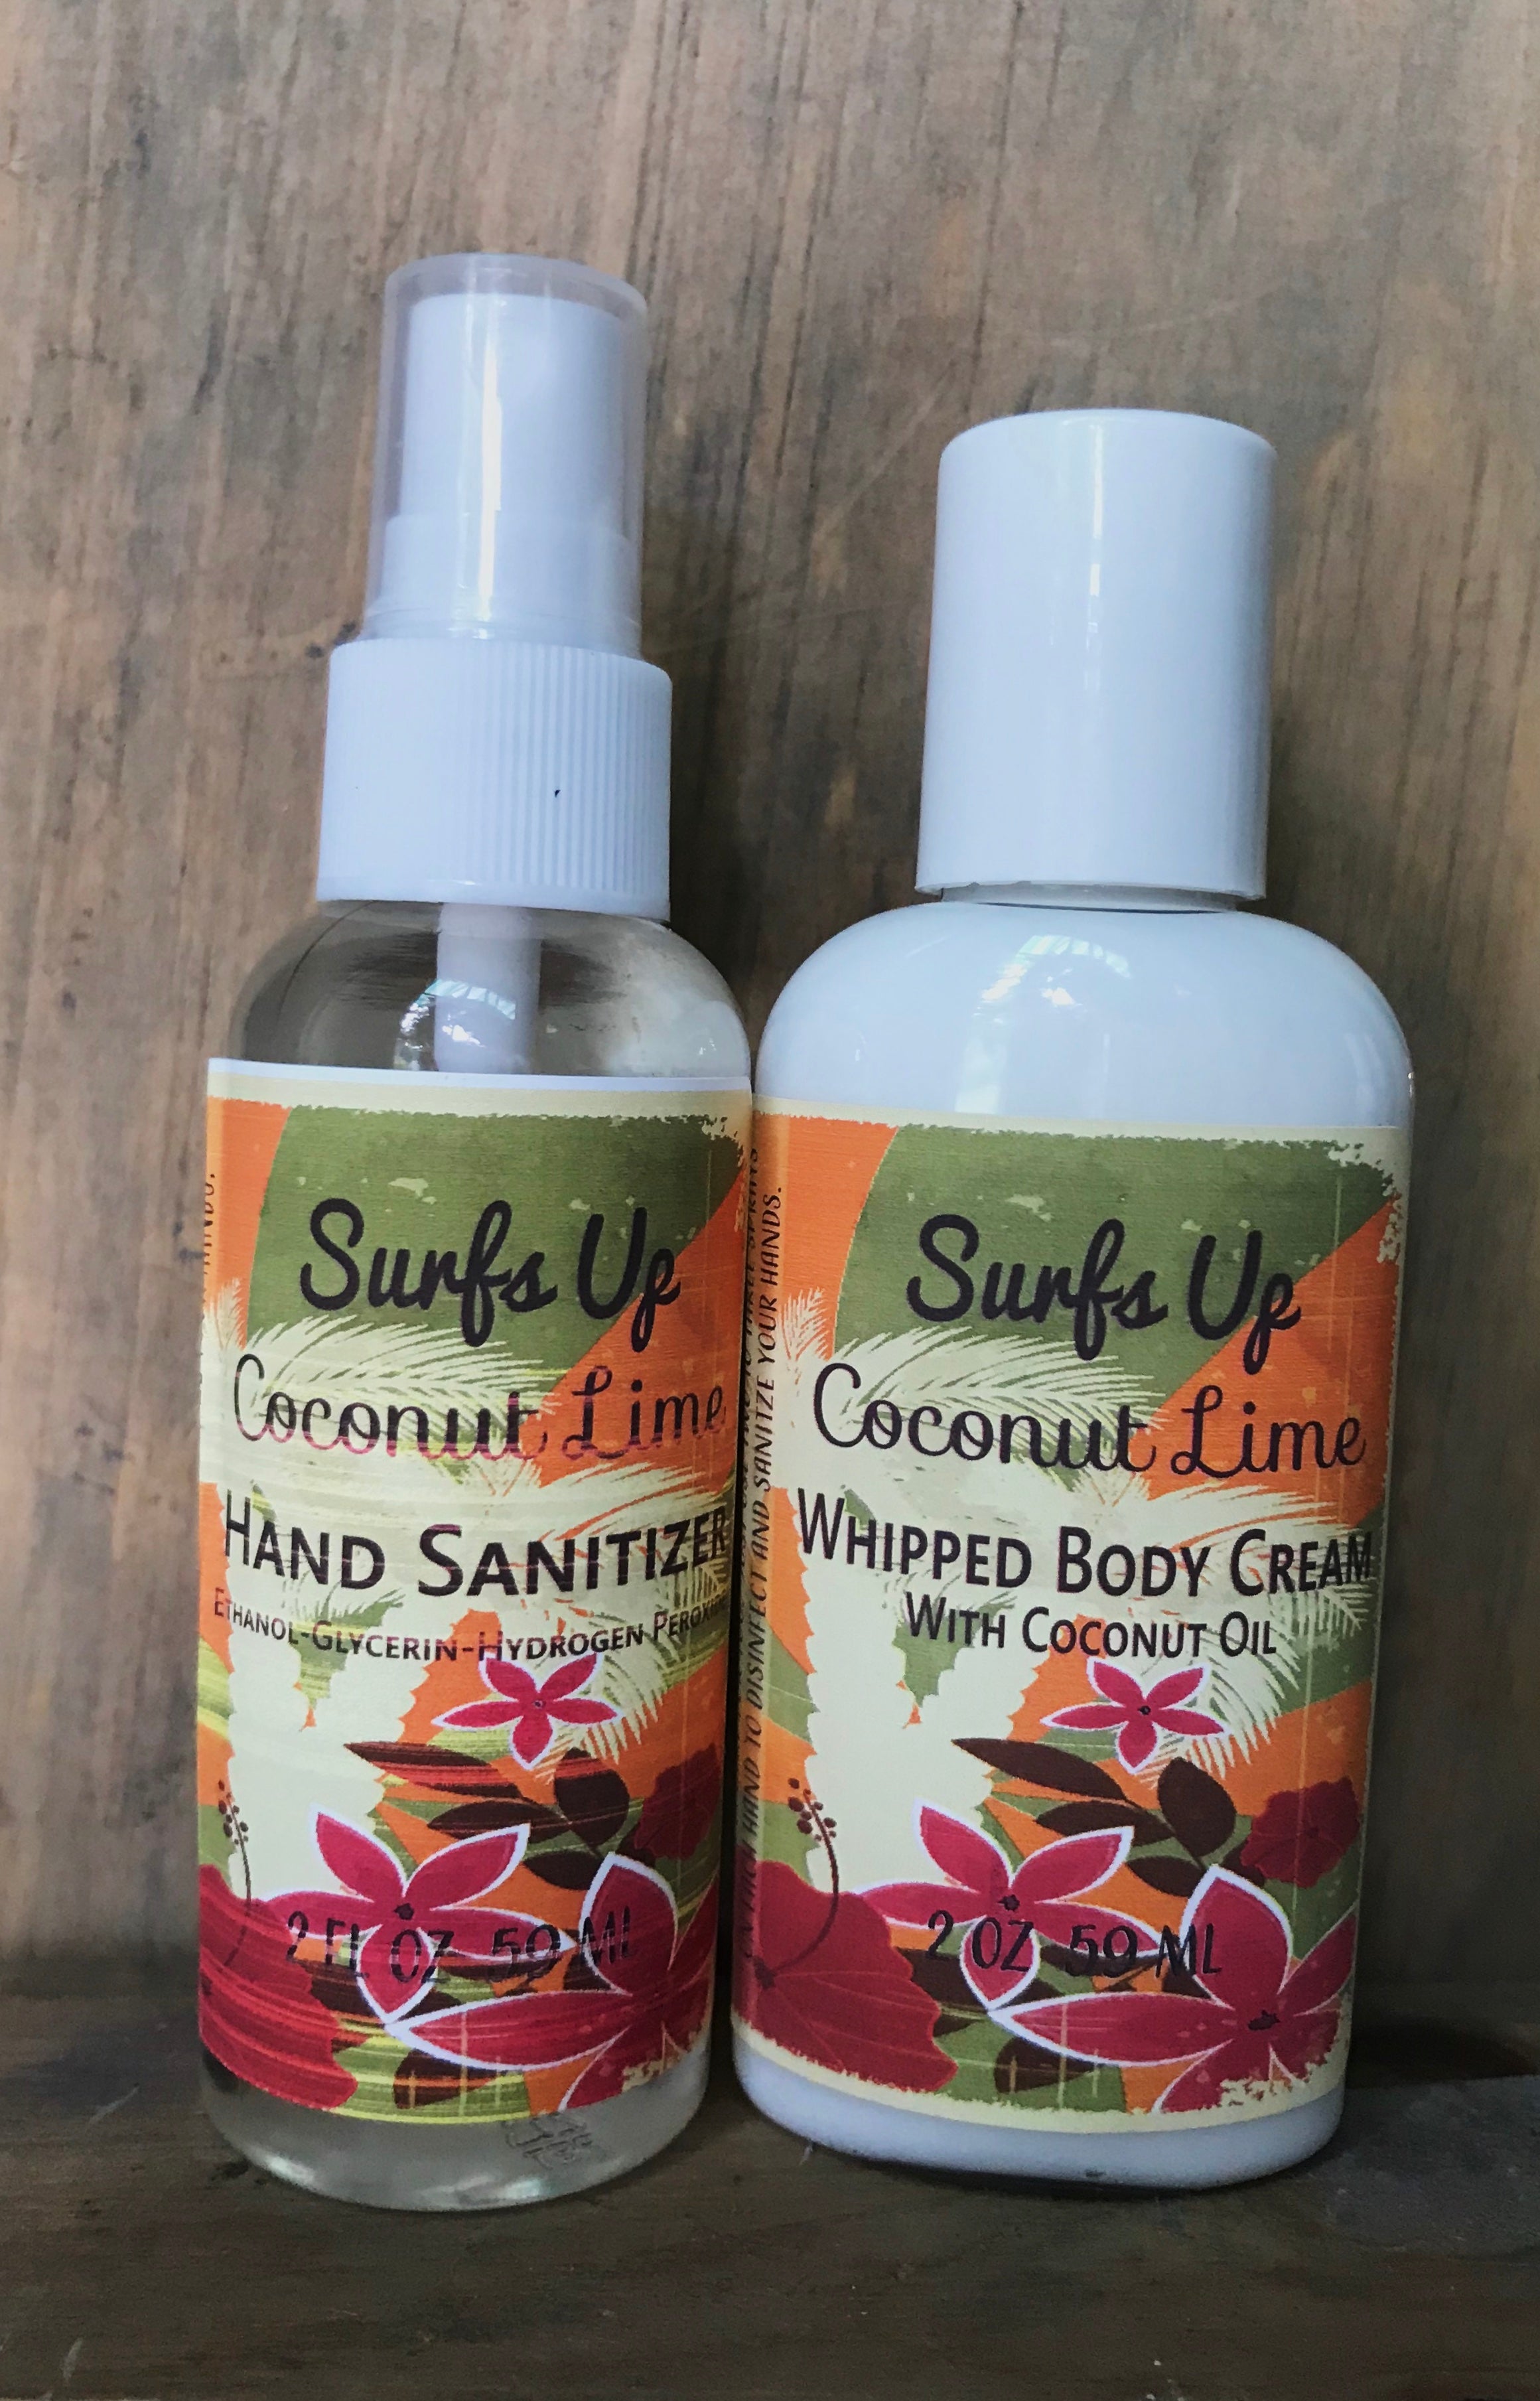 2oz Lotion and Hand Sanitizer - Coconut Lime